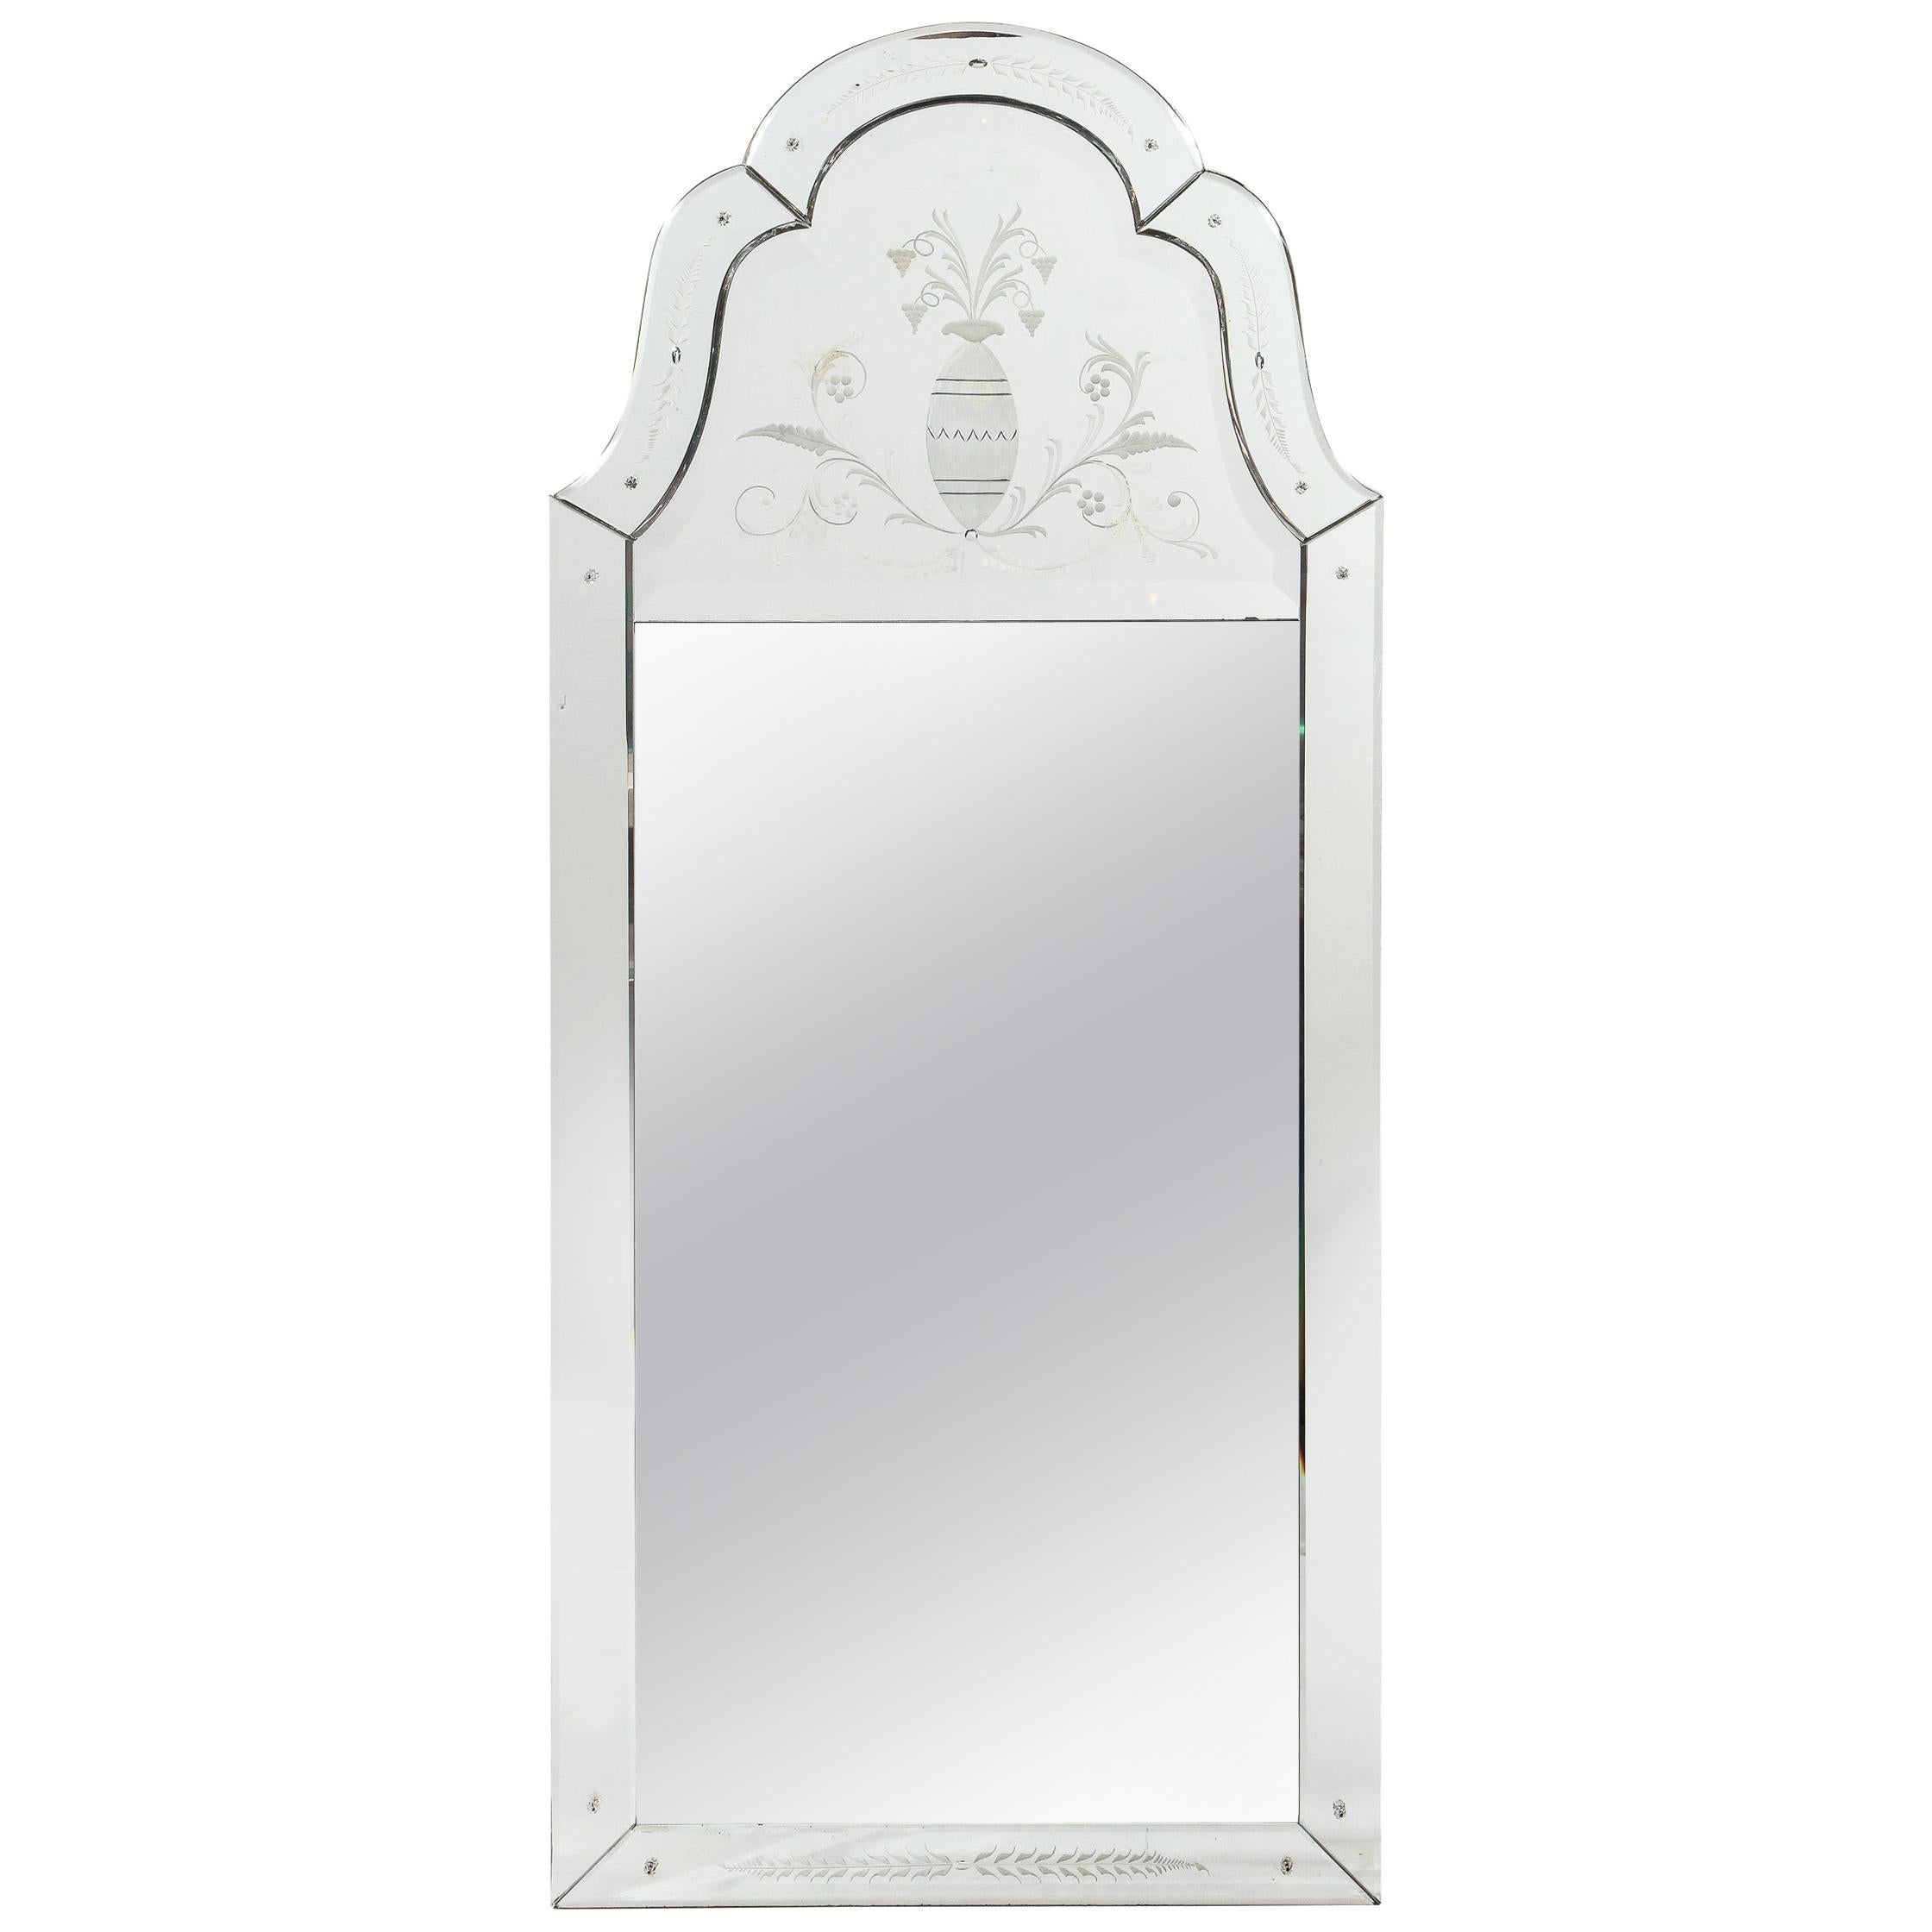 Midcentury Neoclassical Style Etched and Scalloped Mirror with Foliate Detailing